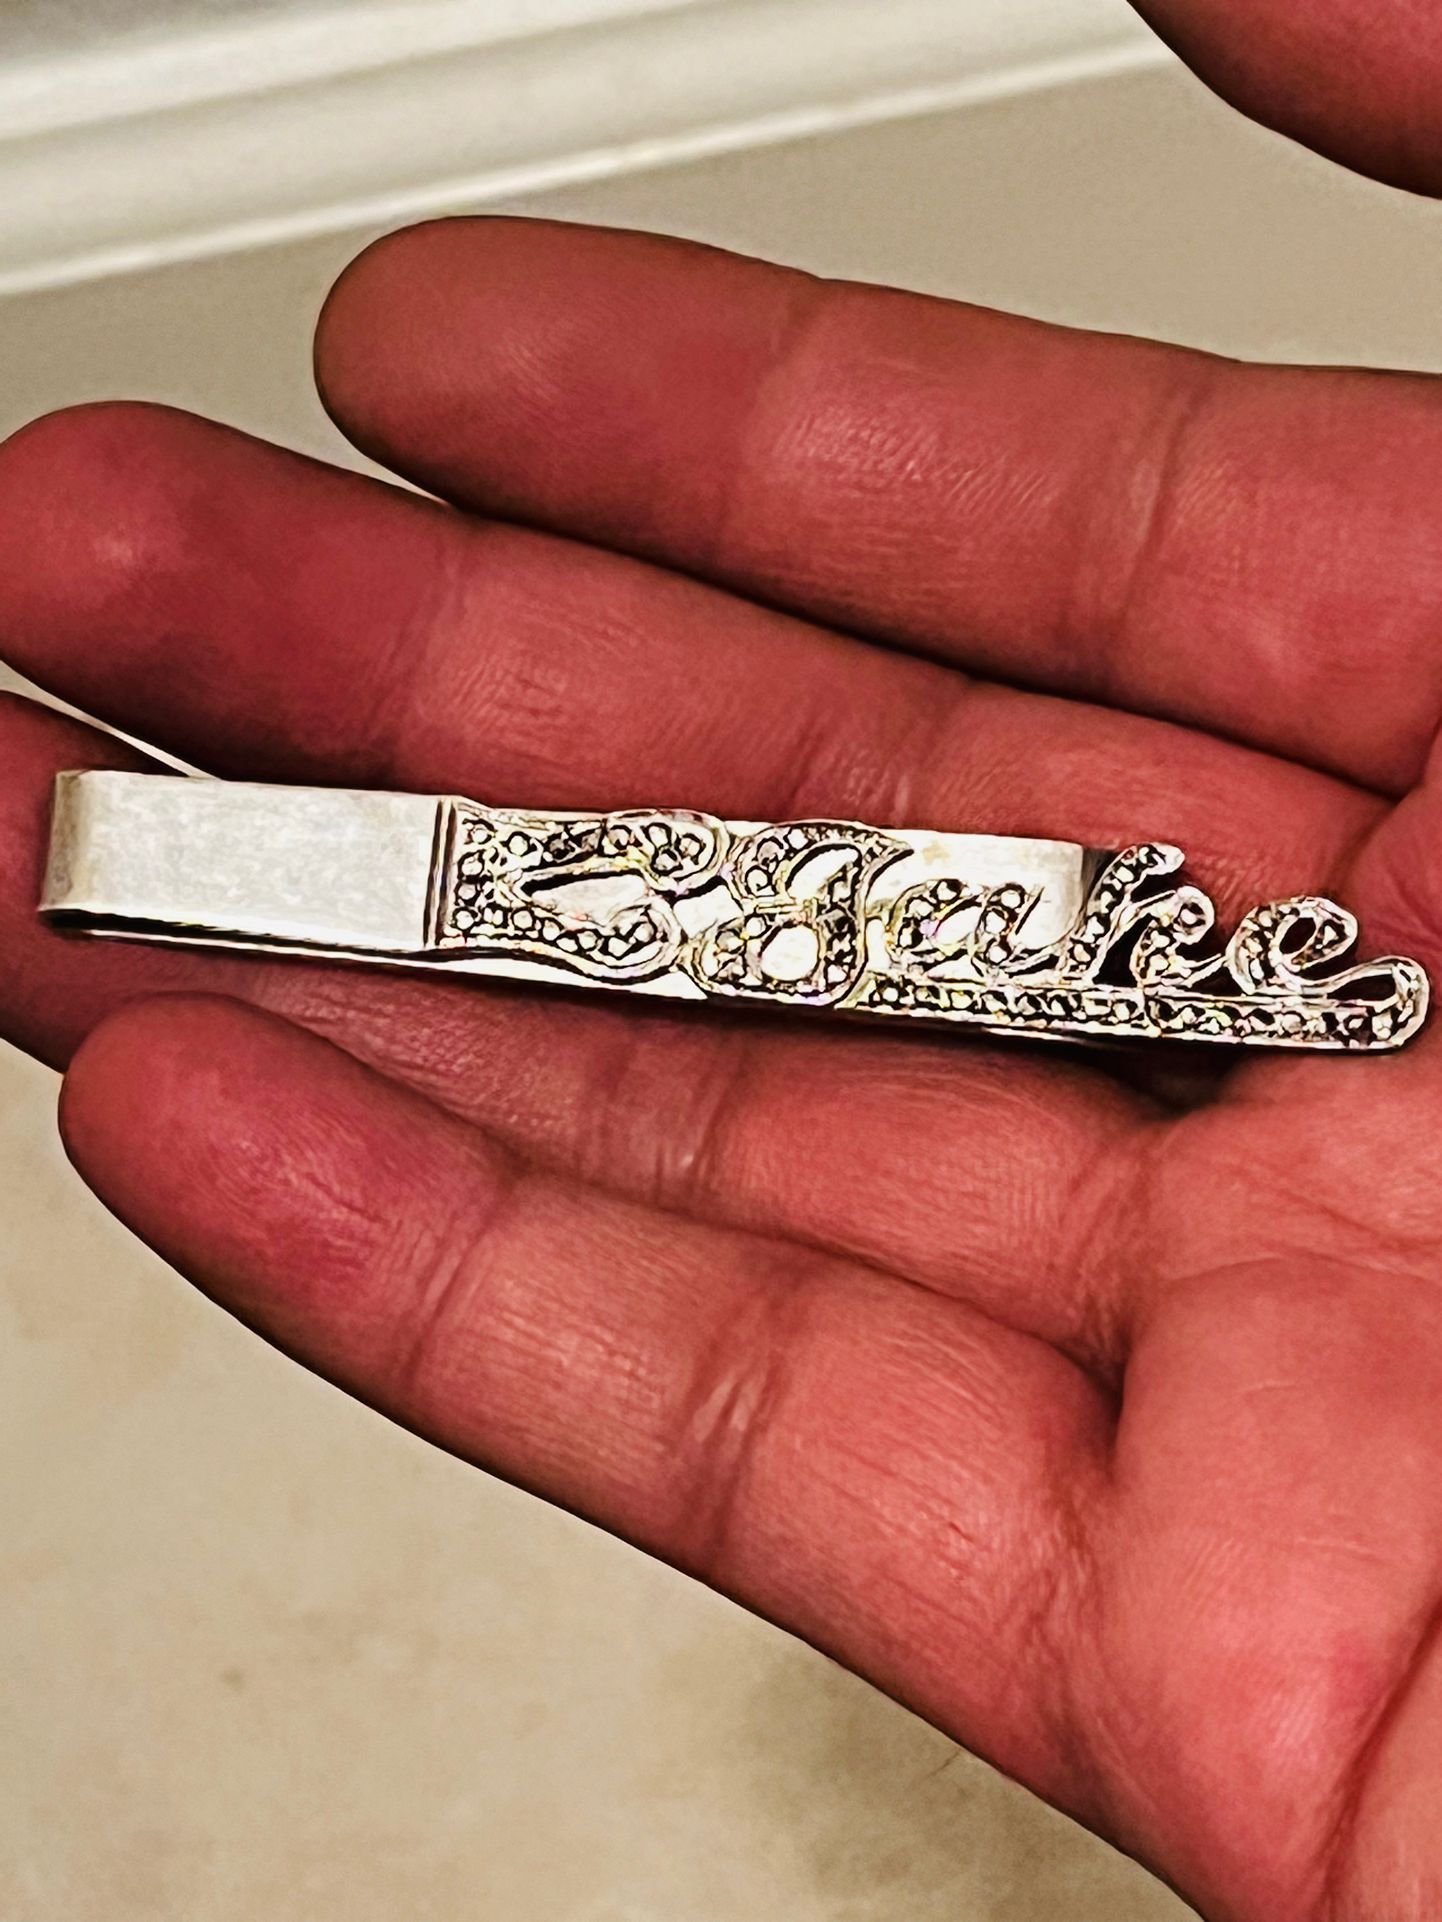 Crown Jlry Co. Heavy Large Personalized Tie Clip  Sterling Silver Marcasite Stones